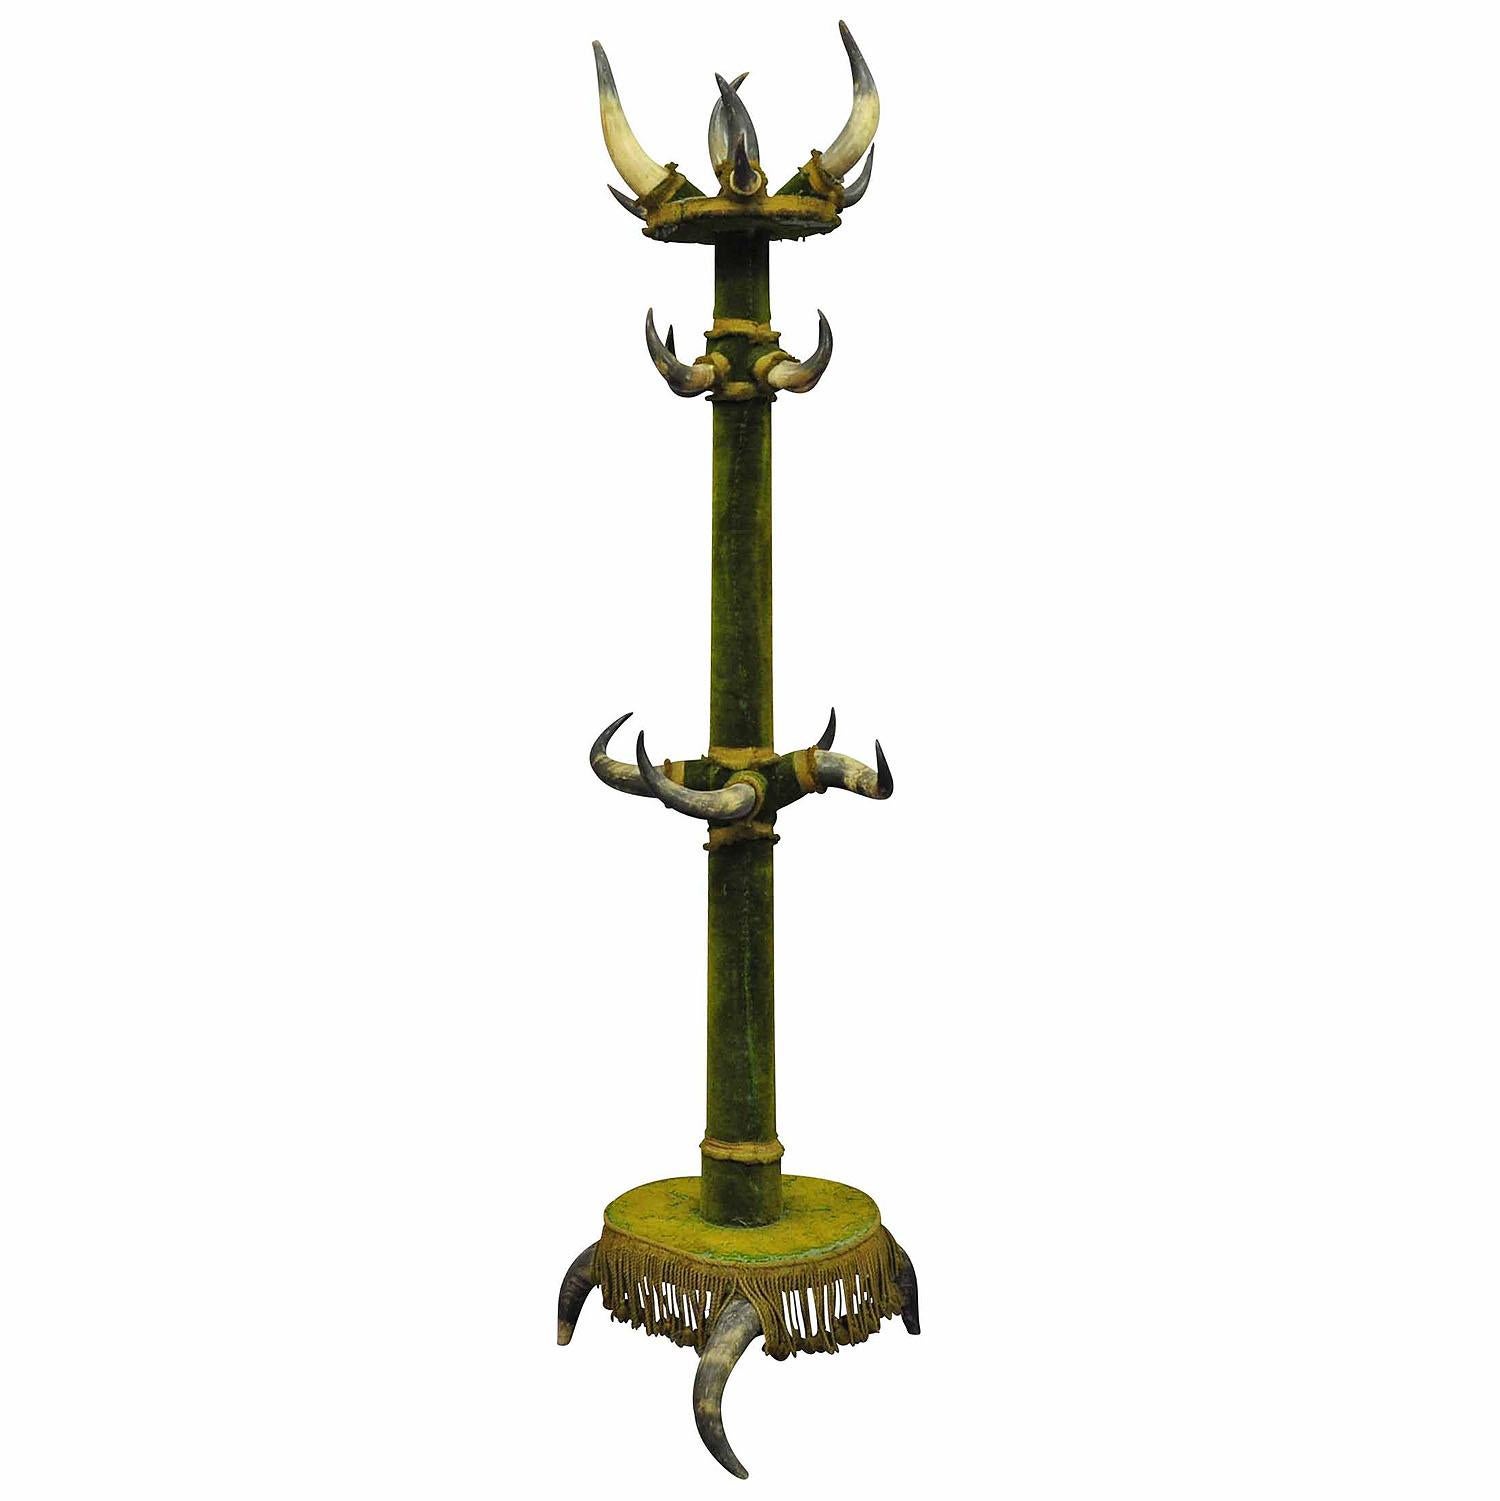 Antique Bull Horn Hall Stand ca .1870

A large bull horn hall stand made of wood, original Austrian cattle horns and a green velvet cover.  Manufactured in Austria ca. 1870. Sturdy condition with original (antique) green velved which has to be